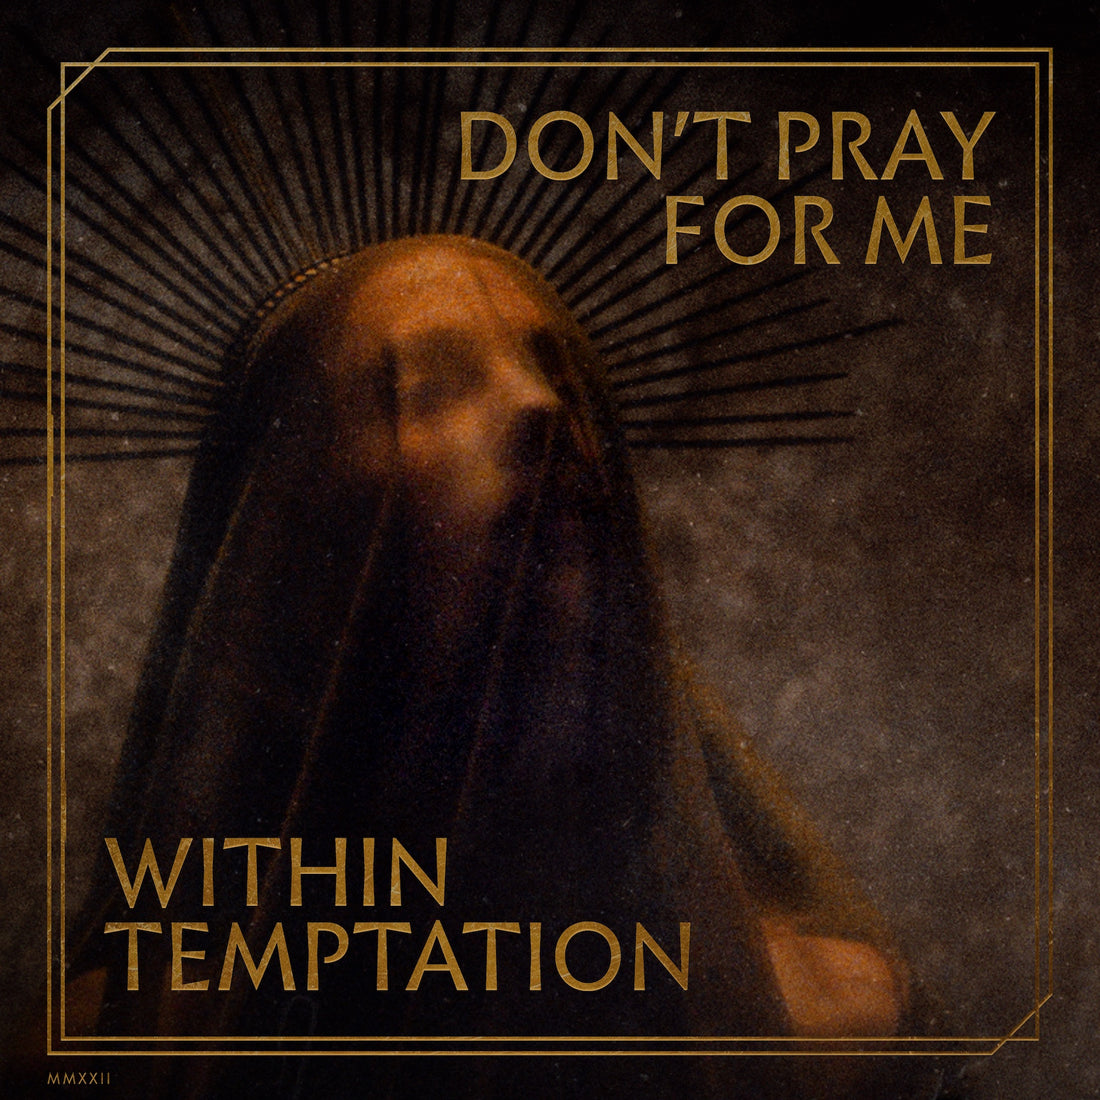 Pre-save 'Don't Pray For Me' and win tickets one of our shows!